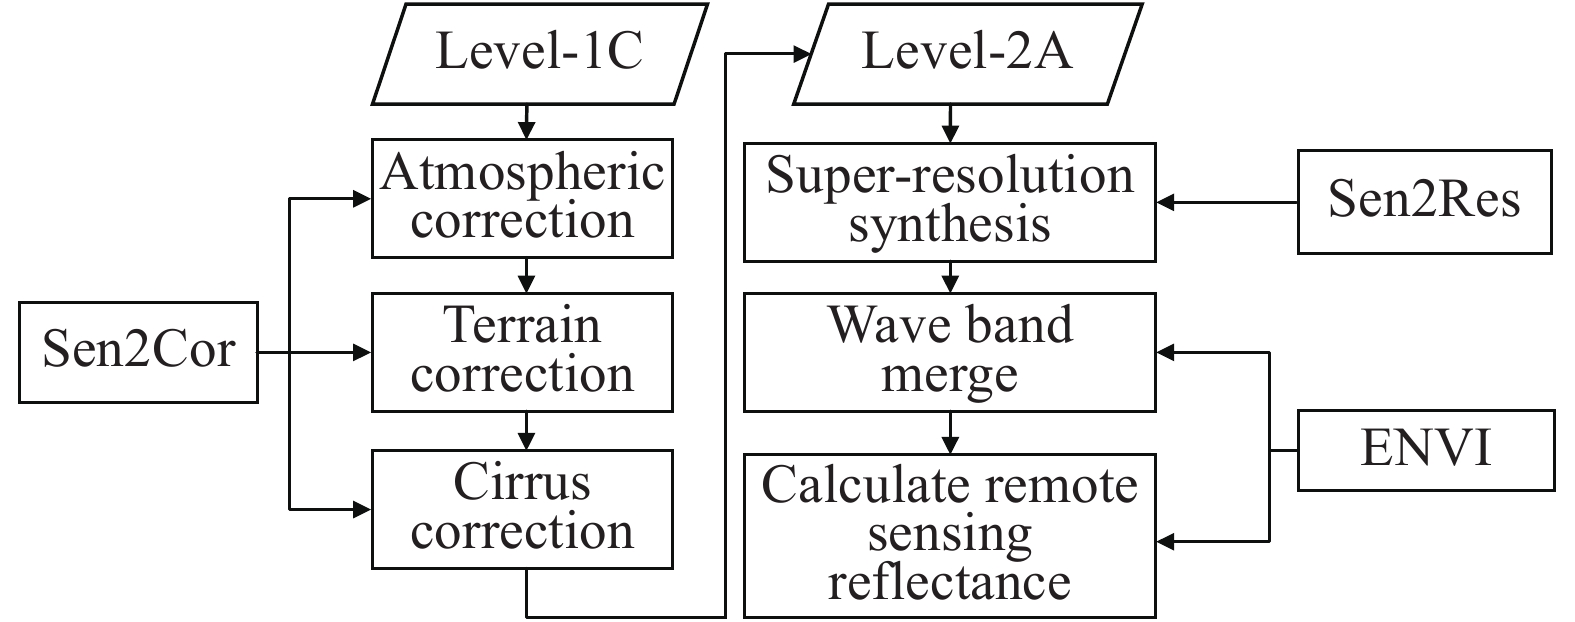 Processing levels from Level-1C to remote sensing reflectivity